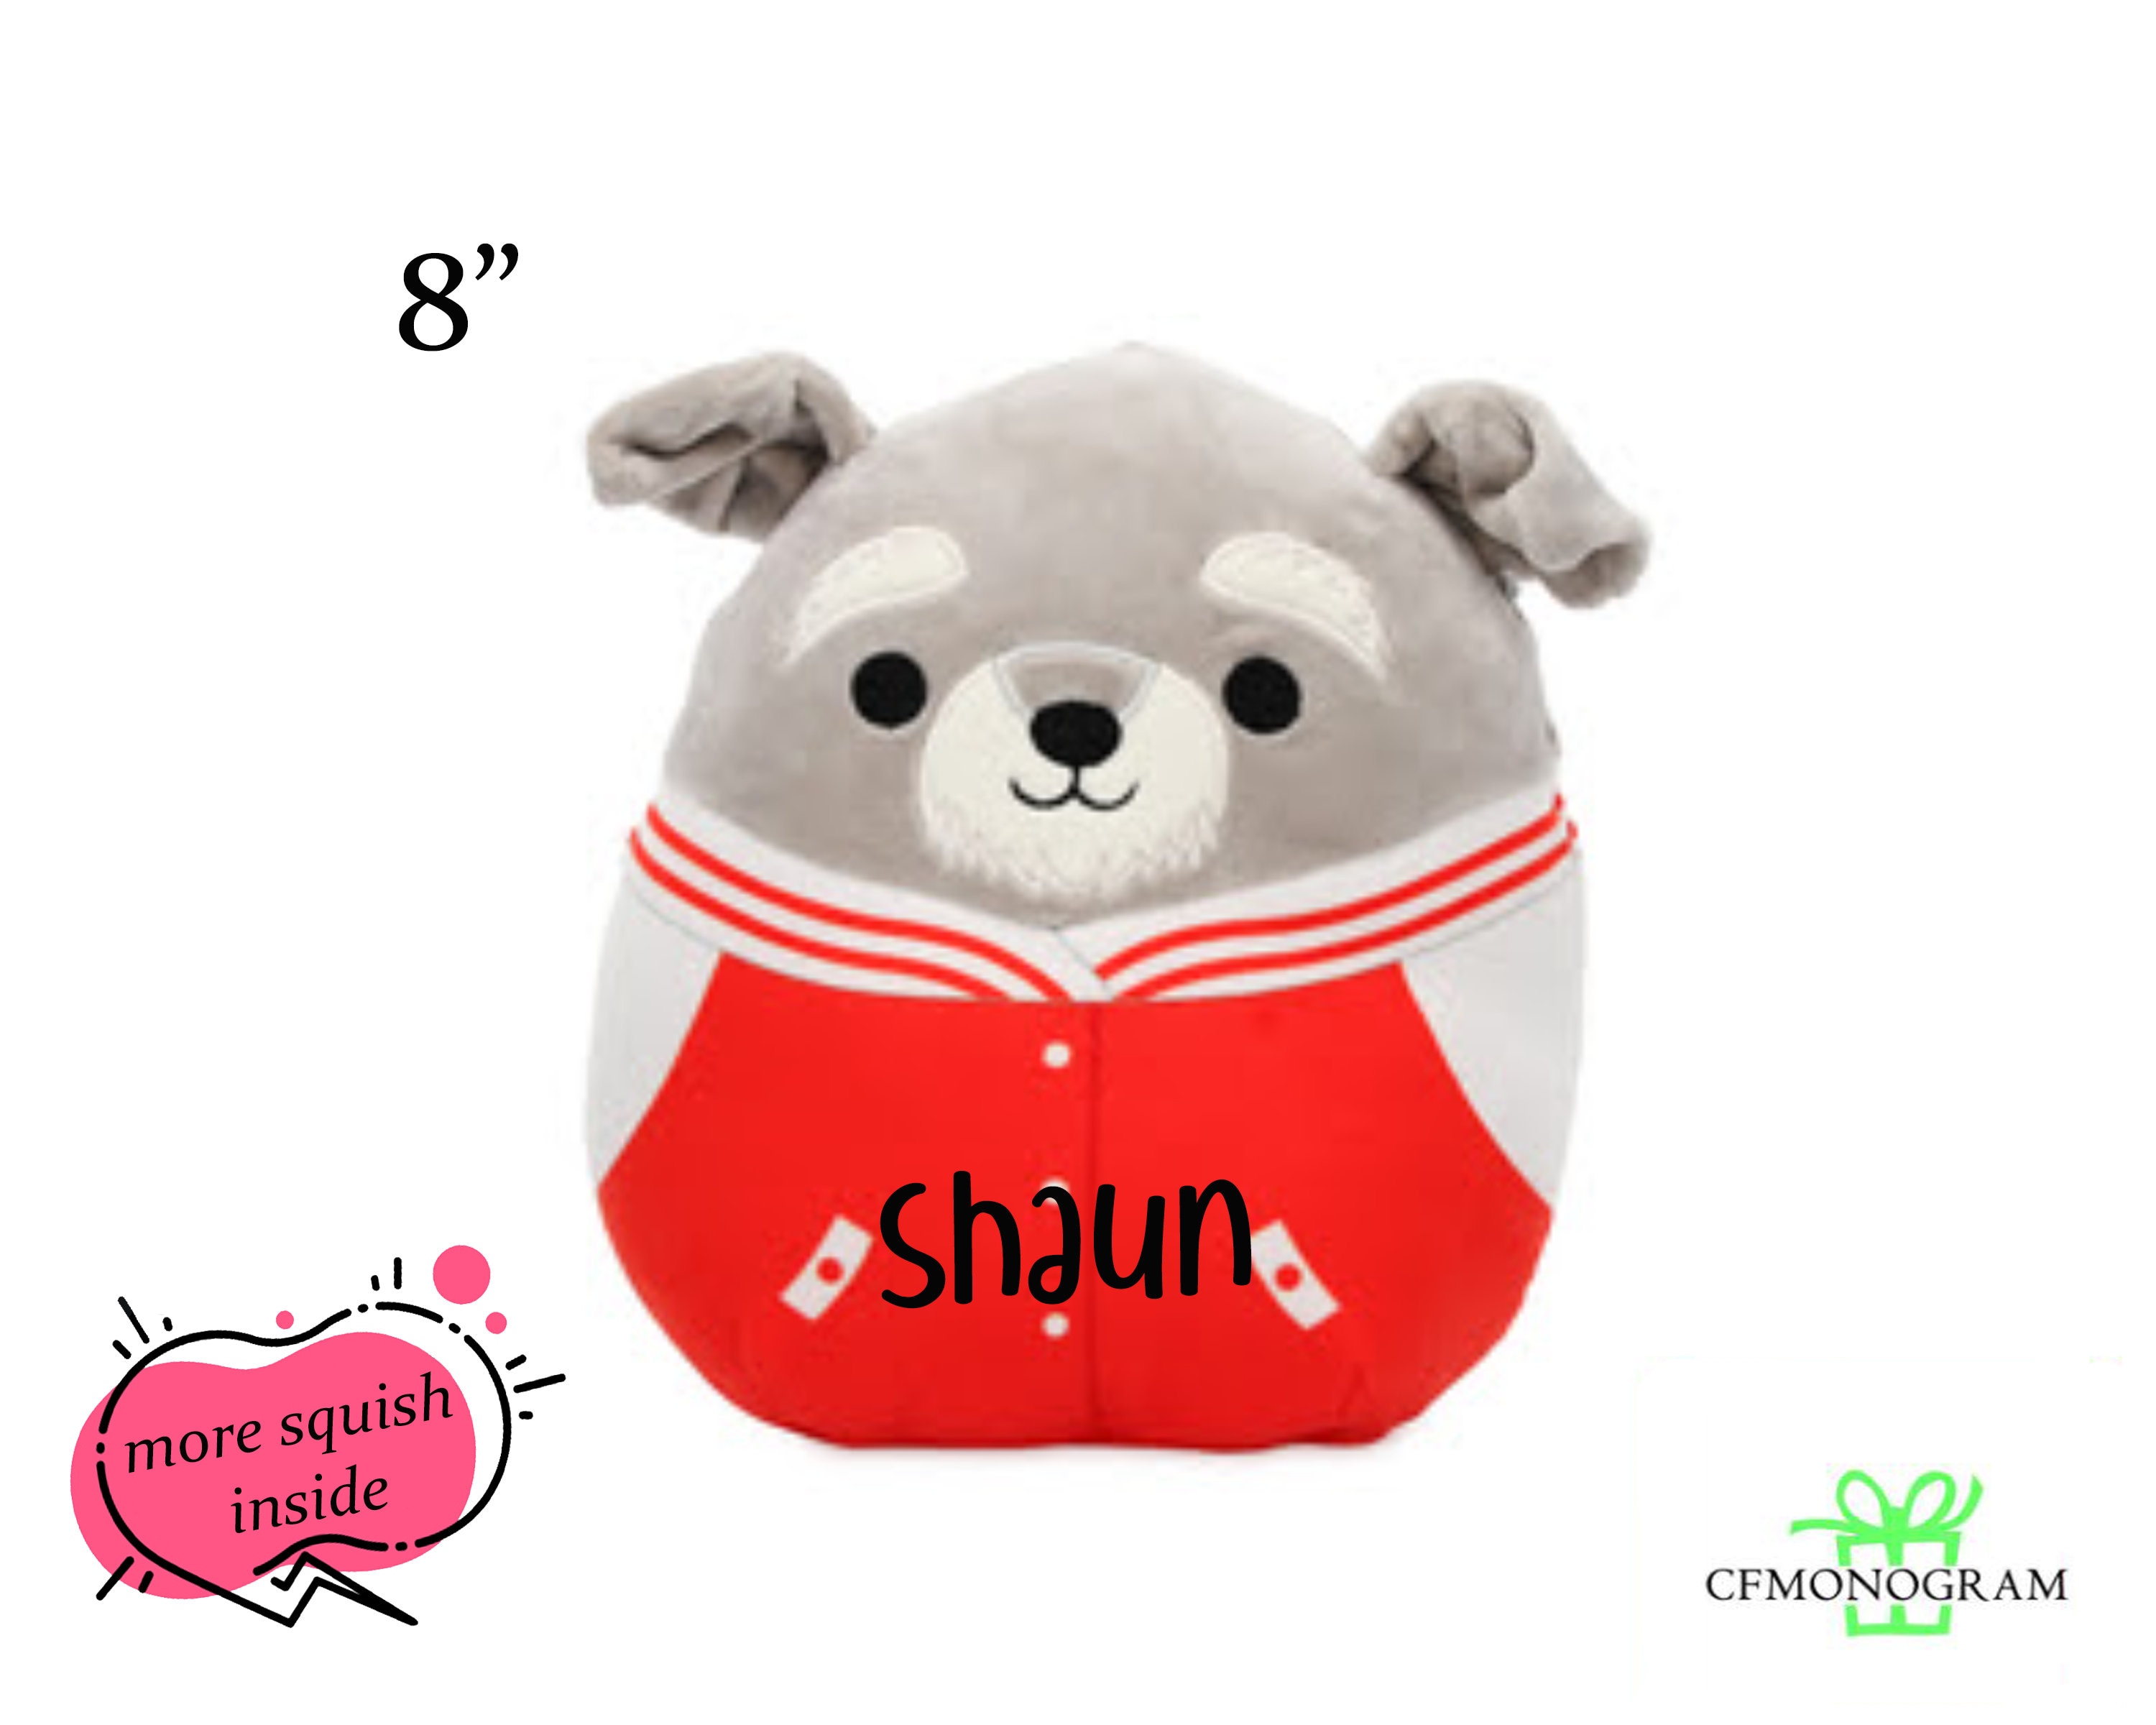 Squishmallows Official Kellytoys Plush 8 Inch Prince the Pug Football  Jerseys Ultimate Soft Stuffed Toy